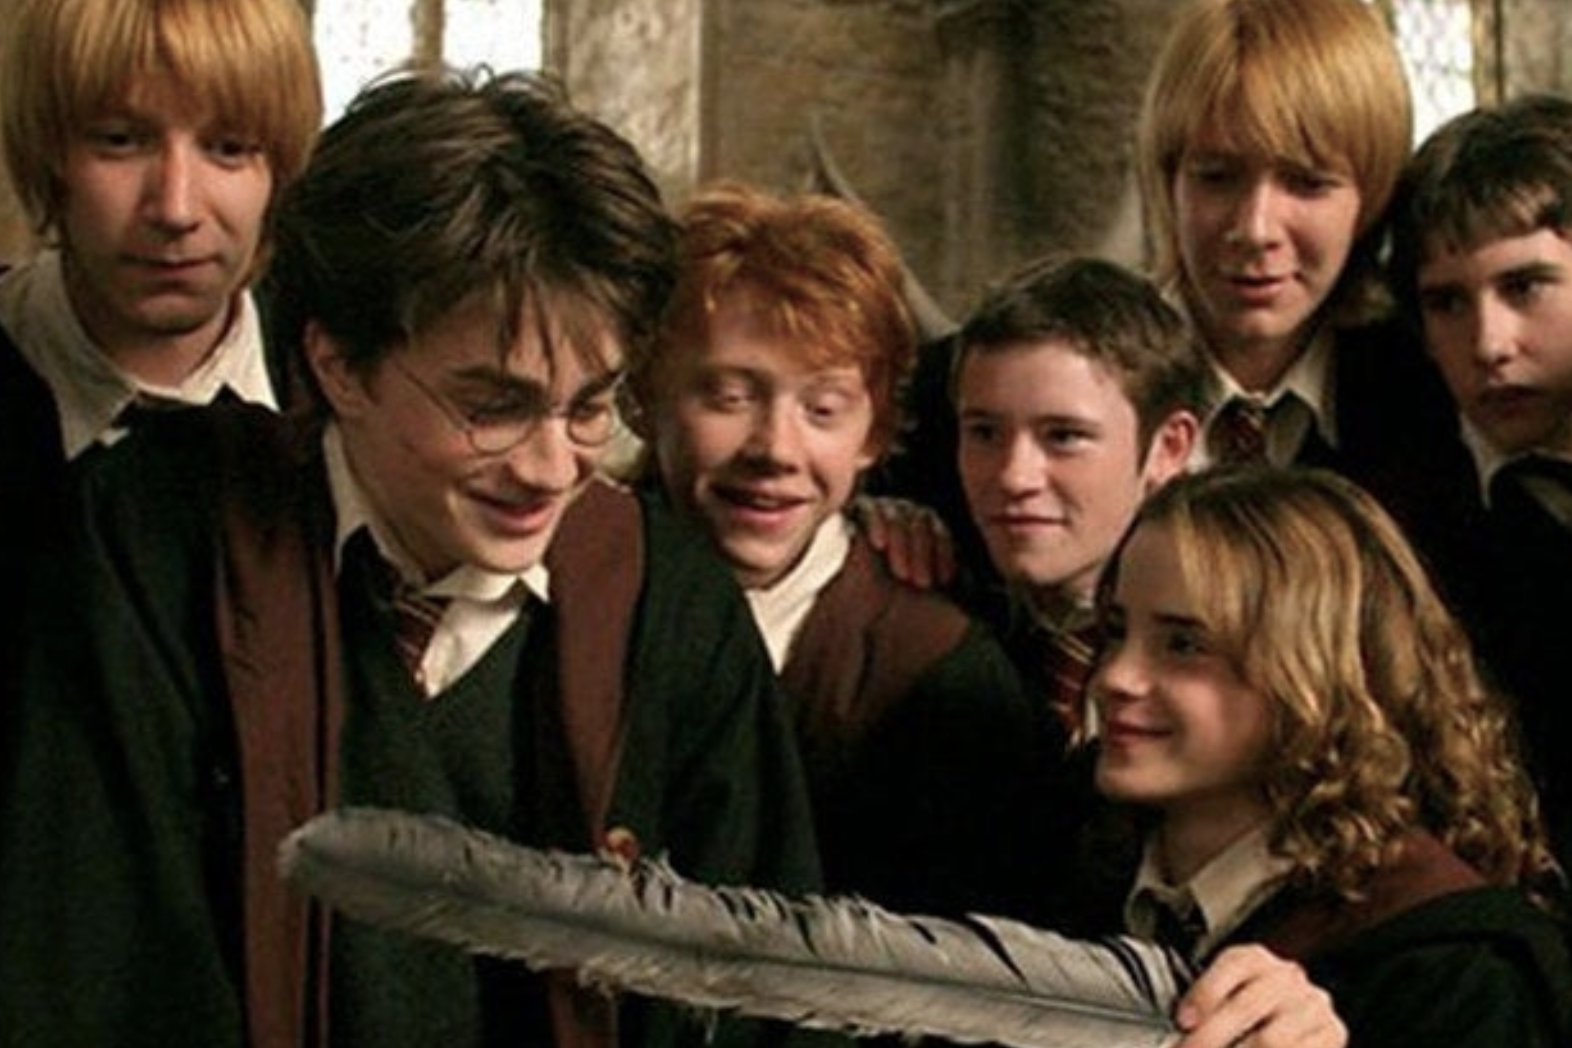 Group of Harry Potter characters smiling with a large feather